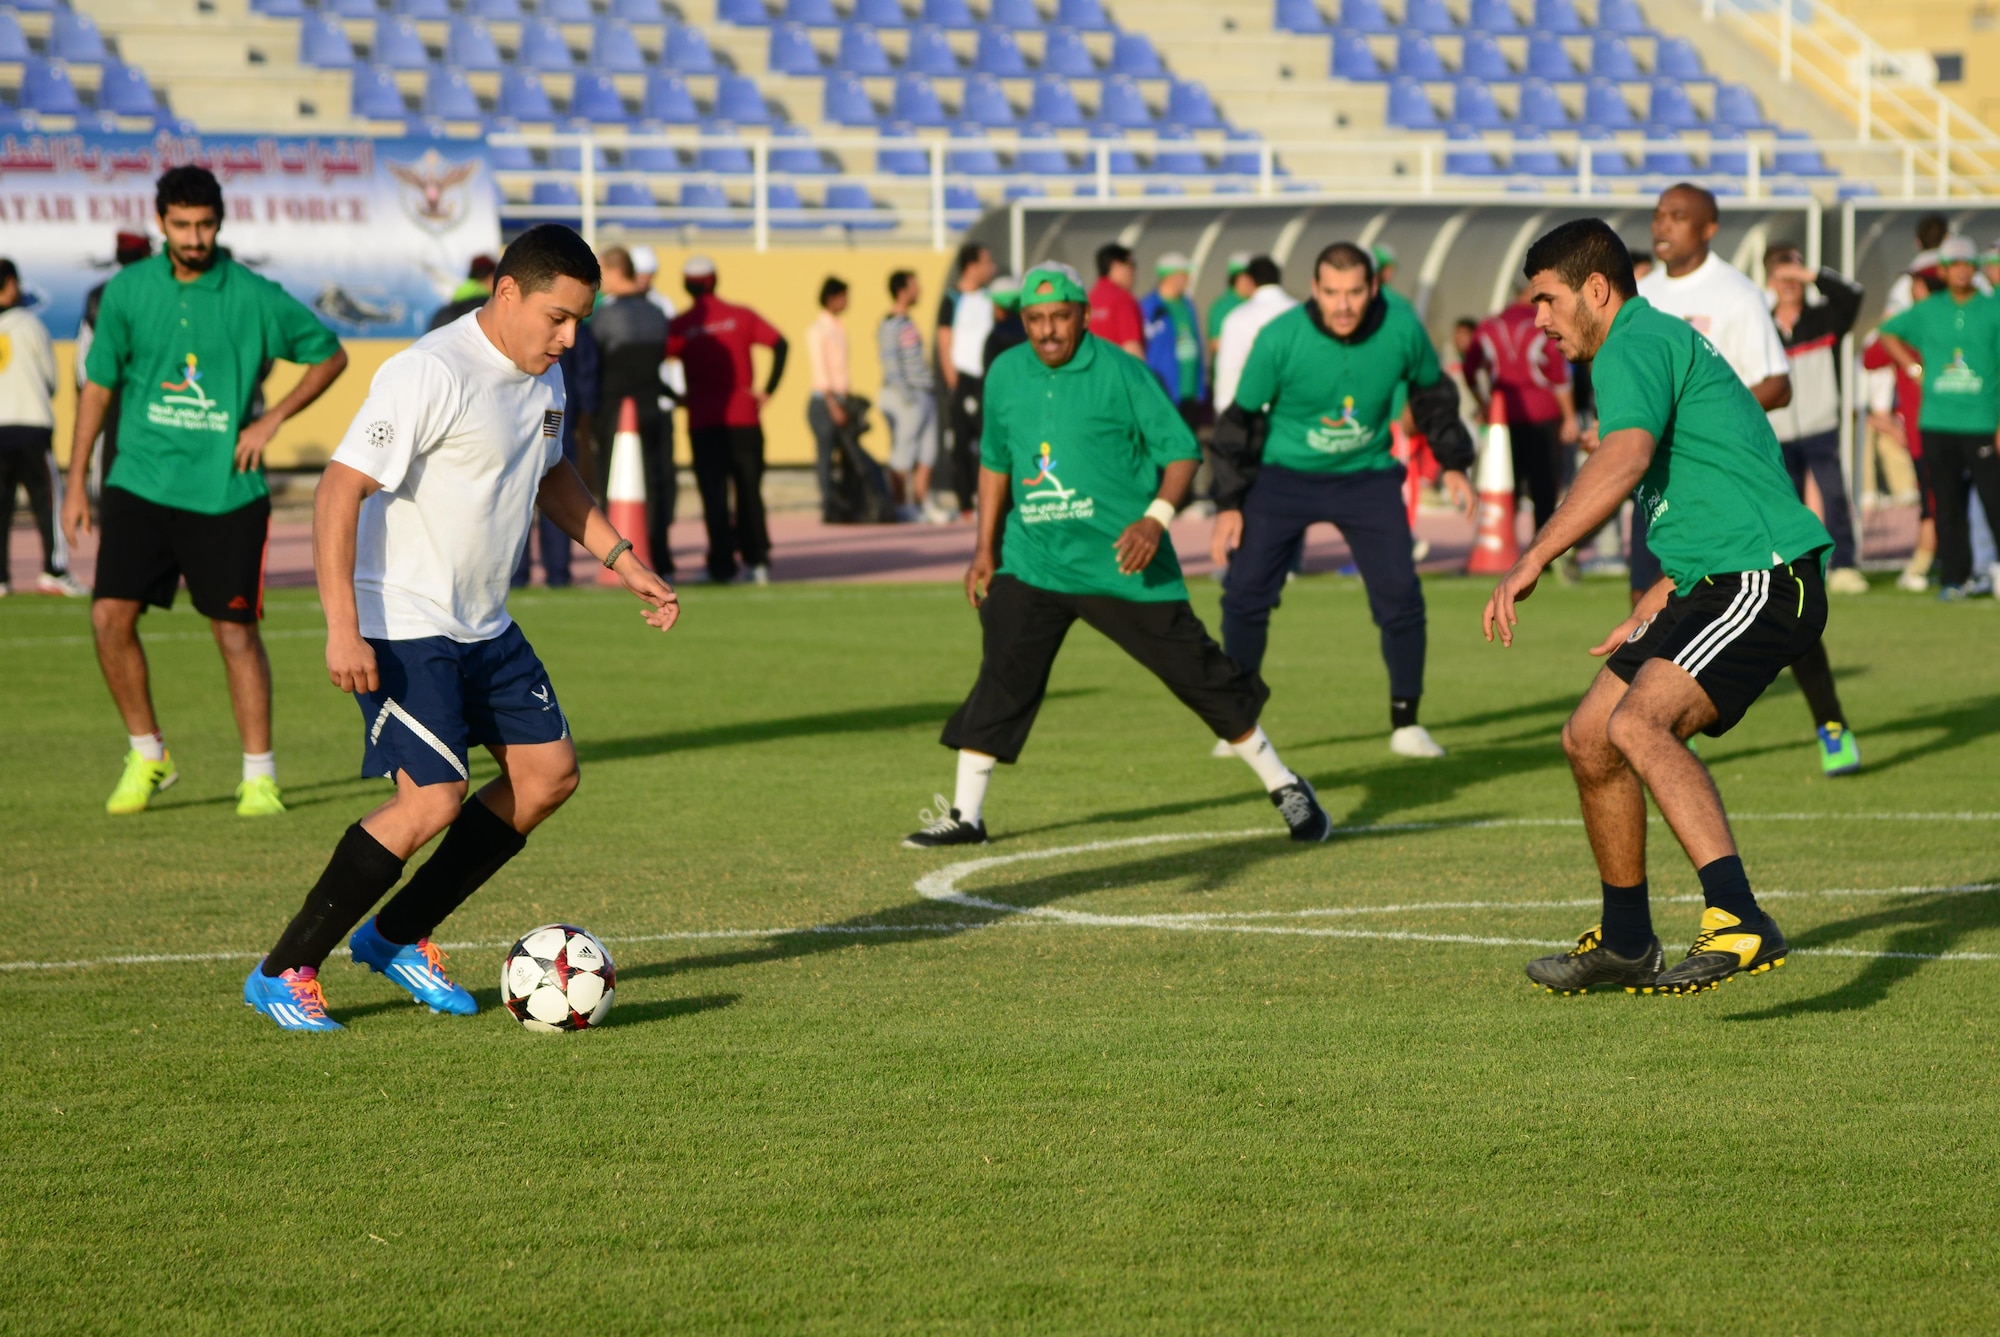 U.S. servicemembers and Qatar Emiri Air Force members play a friendly game of soccer during Qatar National Sports Day, Feb. 10, 2015, at Al Udeid Air Base, Qatar. National Sports Day is a national holiday in Qatar, held annually since 2011 on the second Tuesday of February with the main objective being to promote a healthy lifestyle. (U.S. Air Force photo by Senior Airman Kia Atkins)